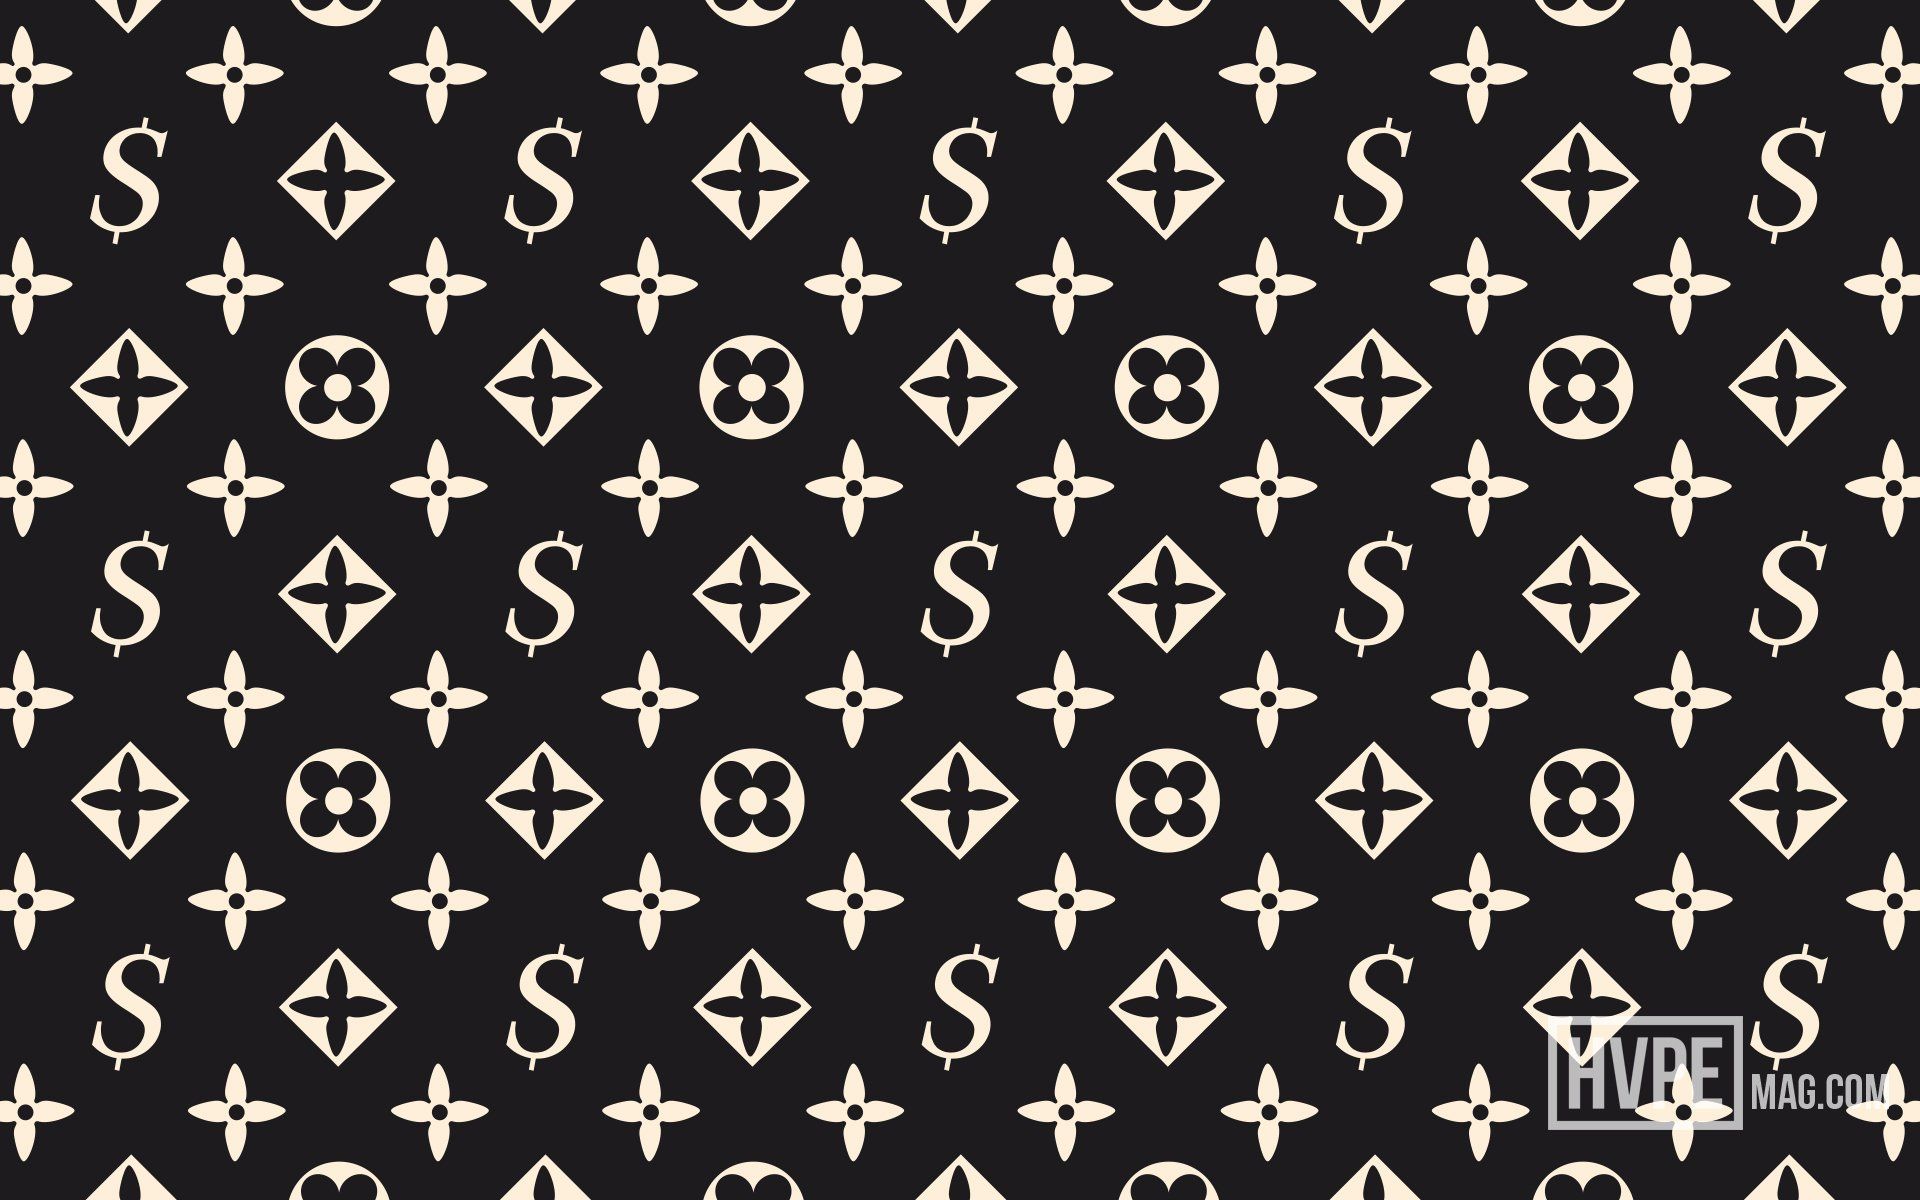 Image Of Louis Vuitton/supreme Cushion - Red Louis Vuitton Pillow Transparent  PNG - 1080x1080 - Free Download on NicePNG